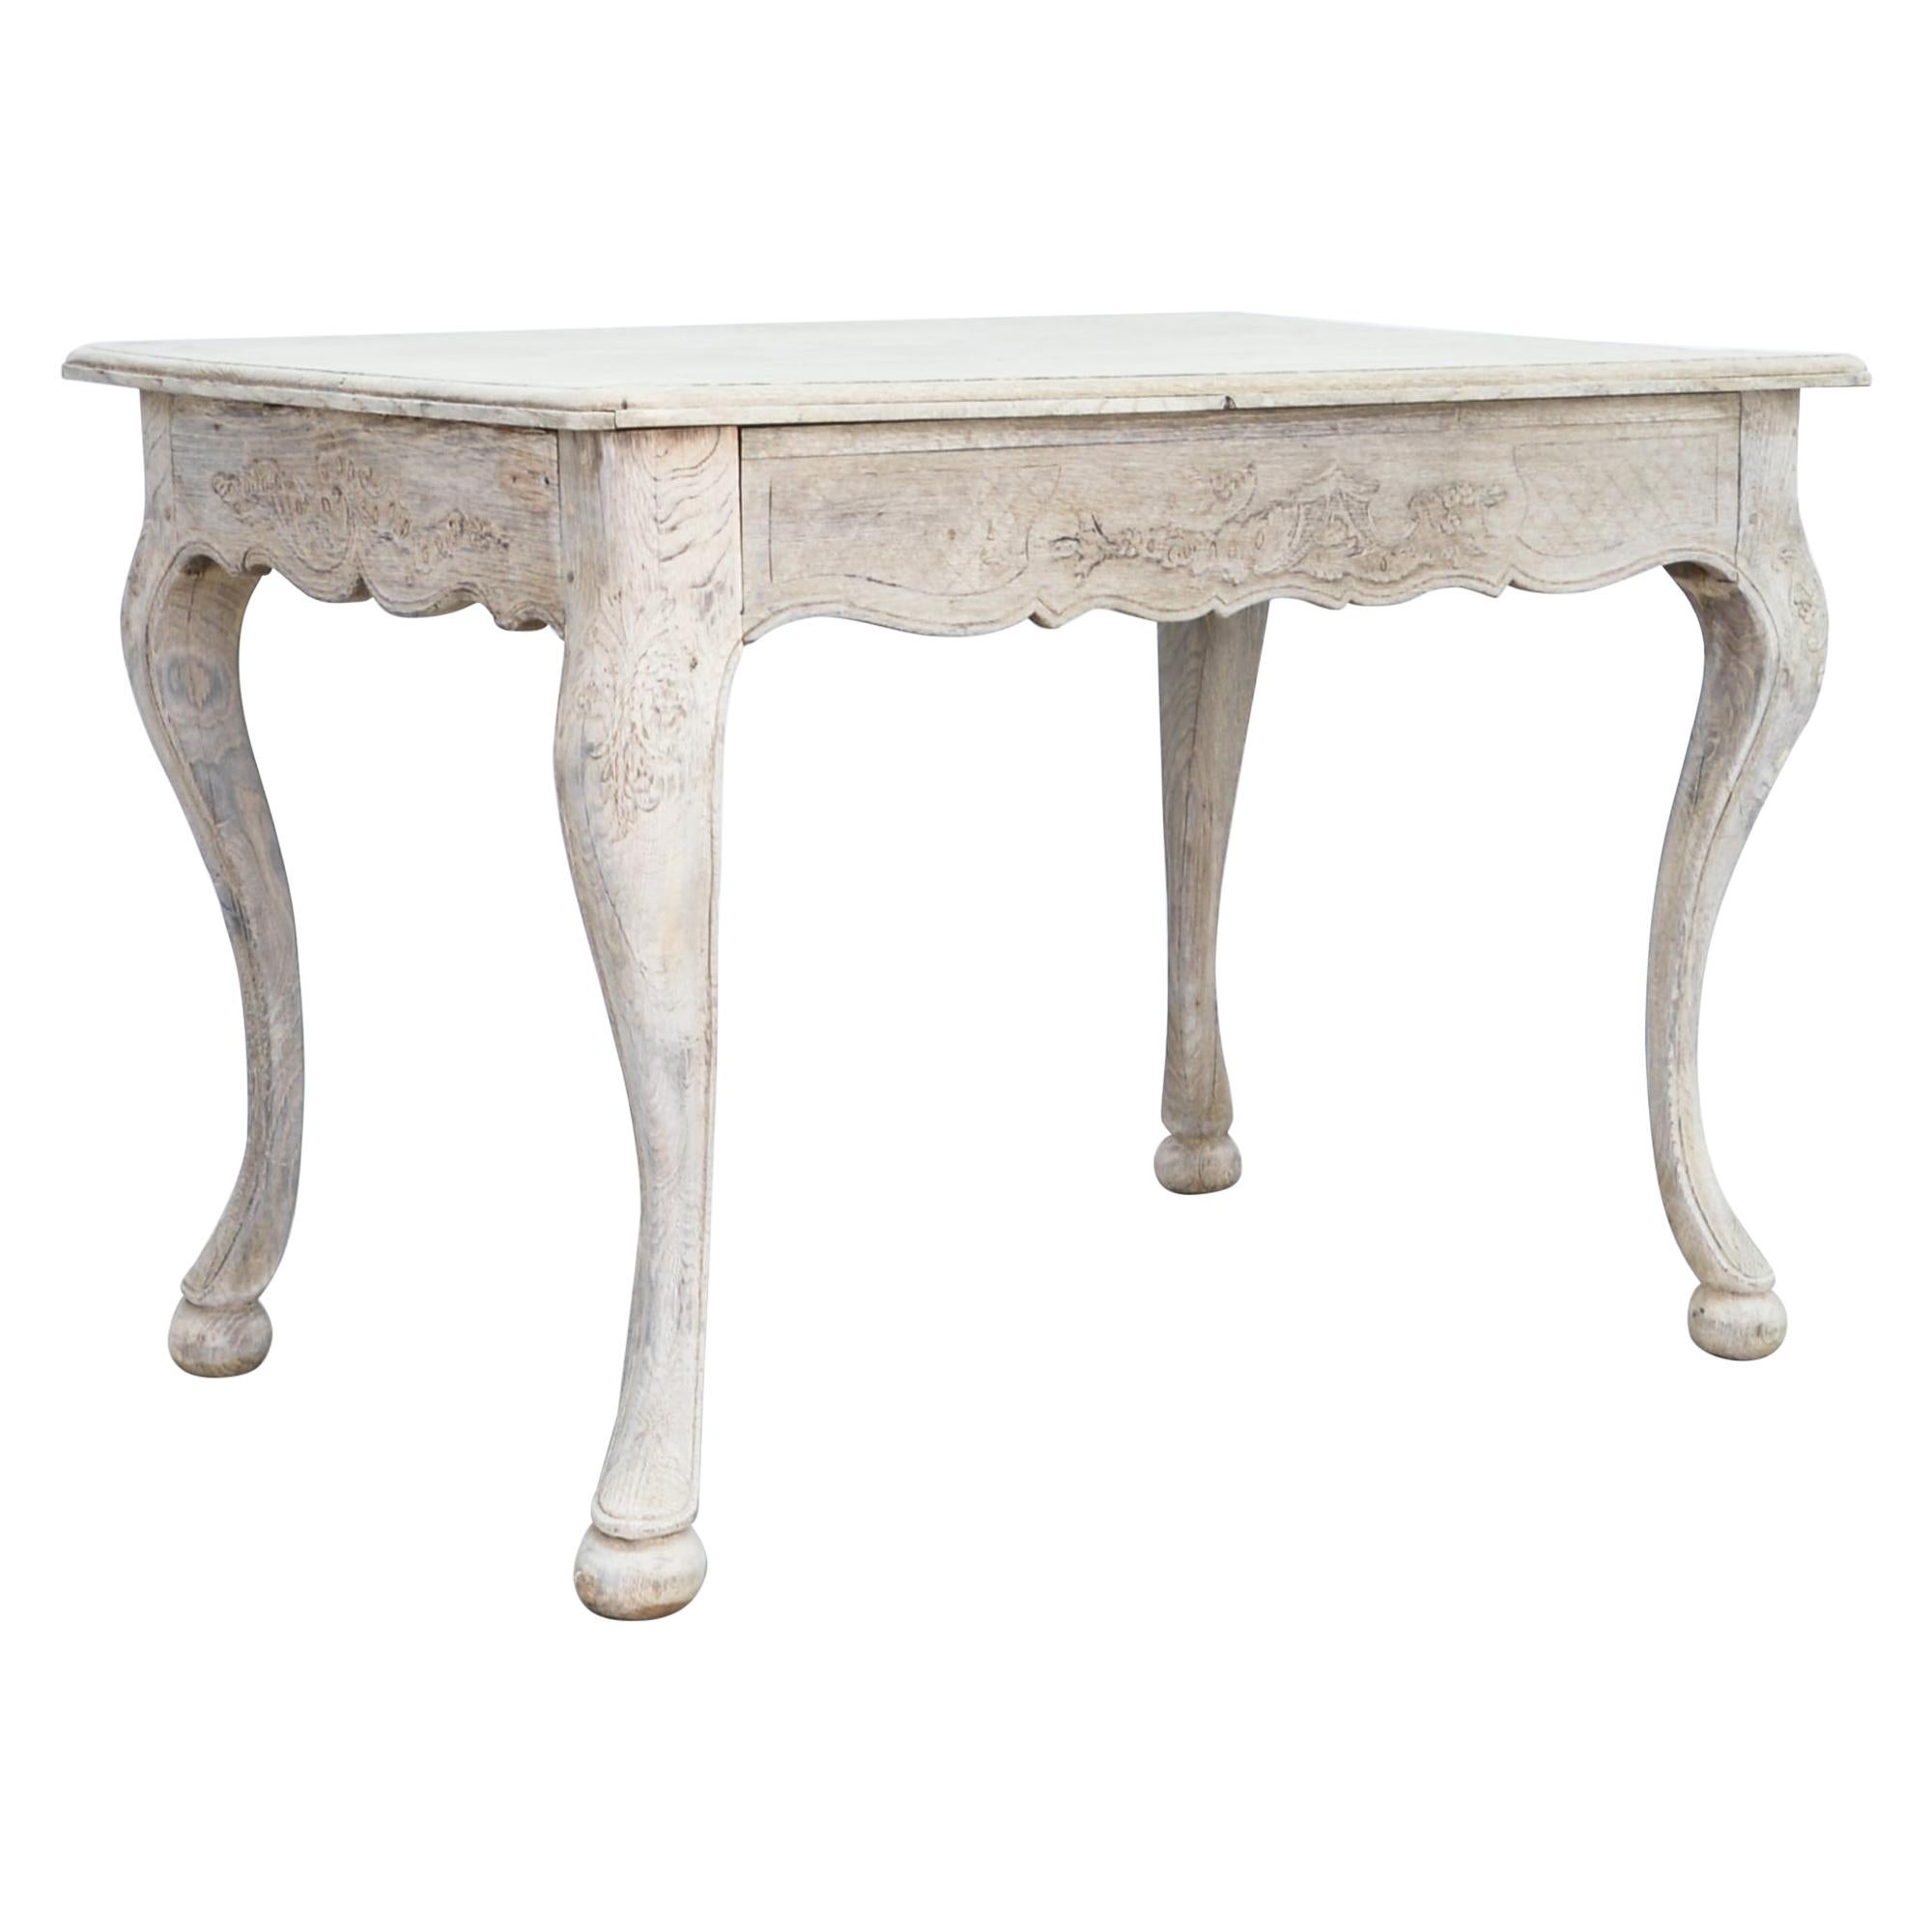 Cabriole Leg French Bleached Oak Table